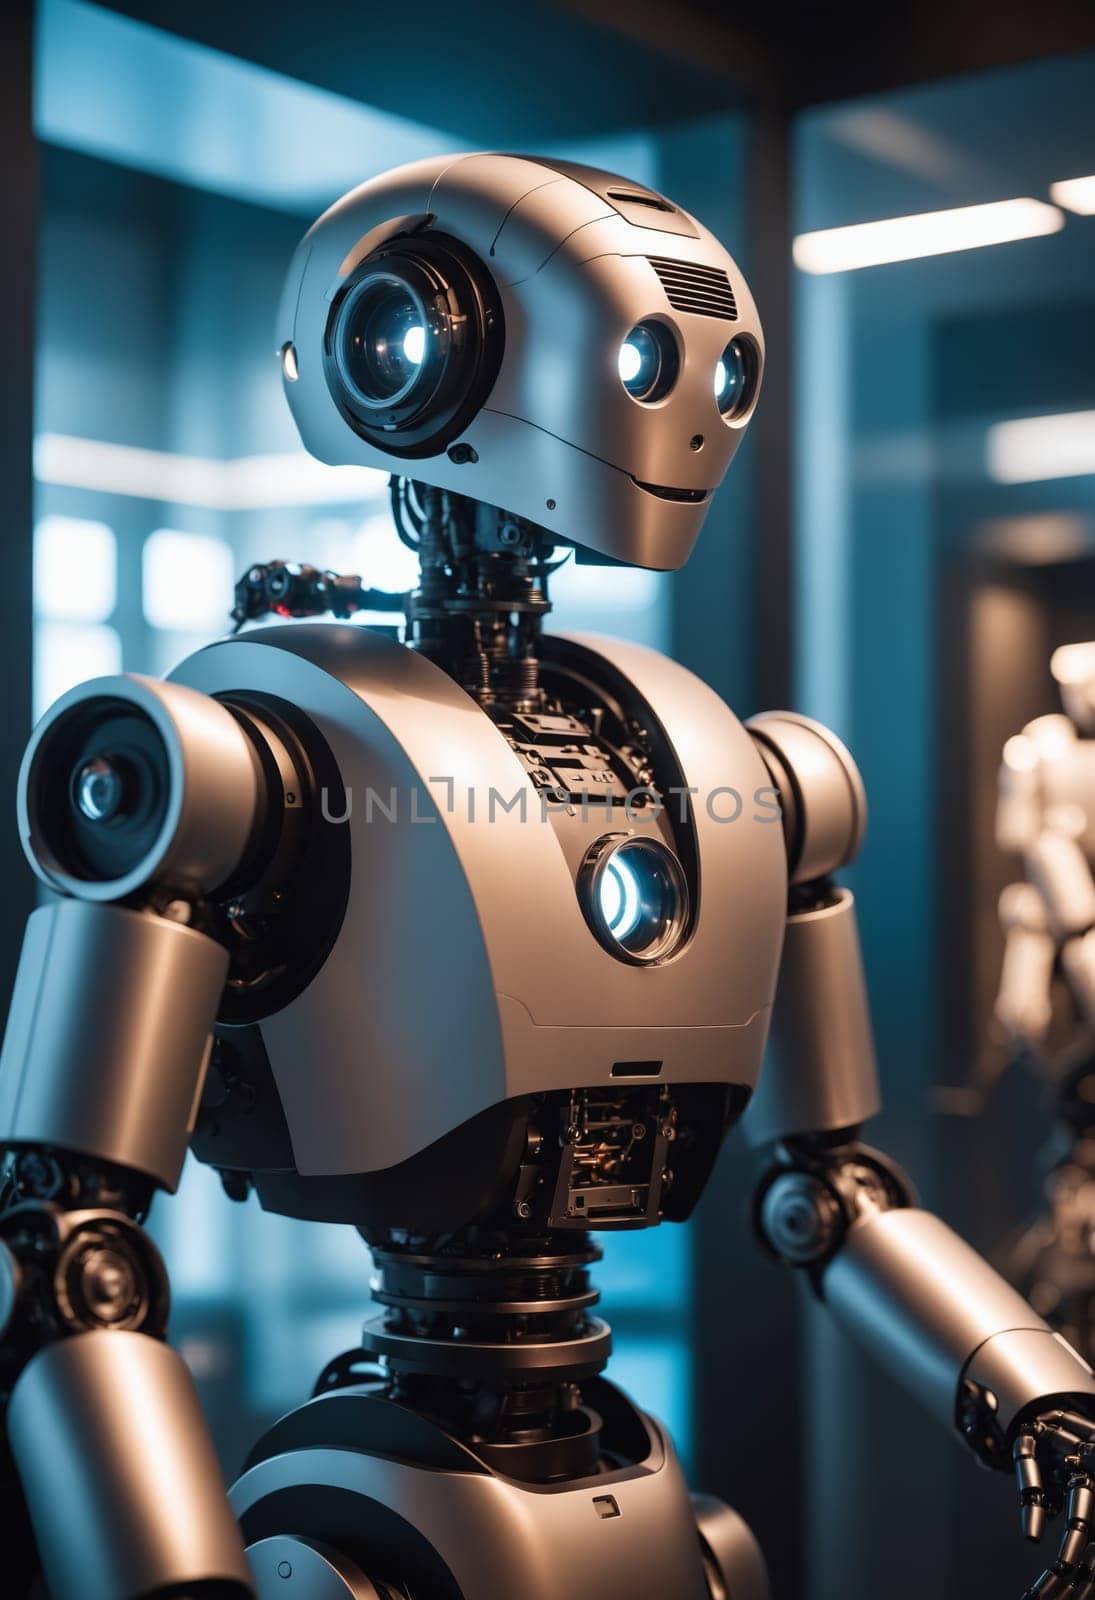 Close up of a collectable metal robot in electric blue color wearing headphones inside a museum. The fictional character looks striking against the darkness